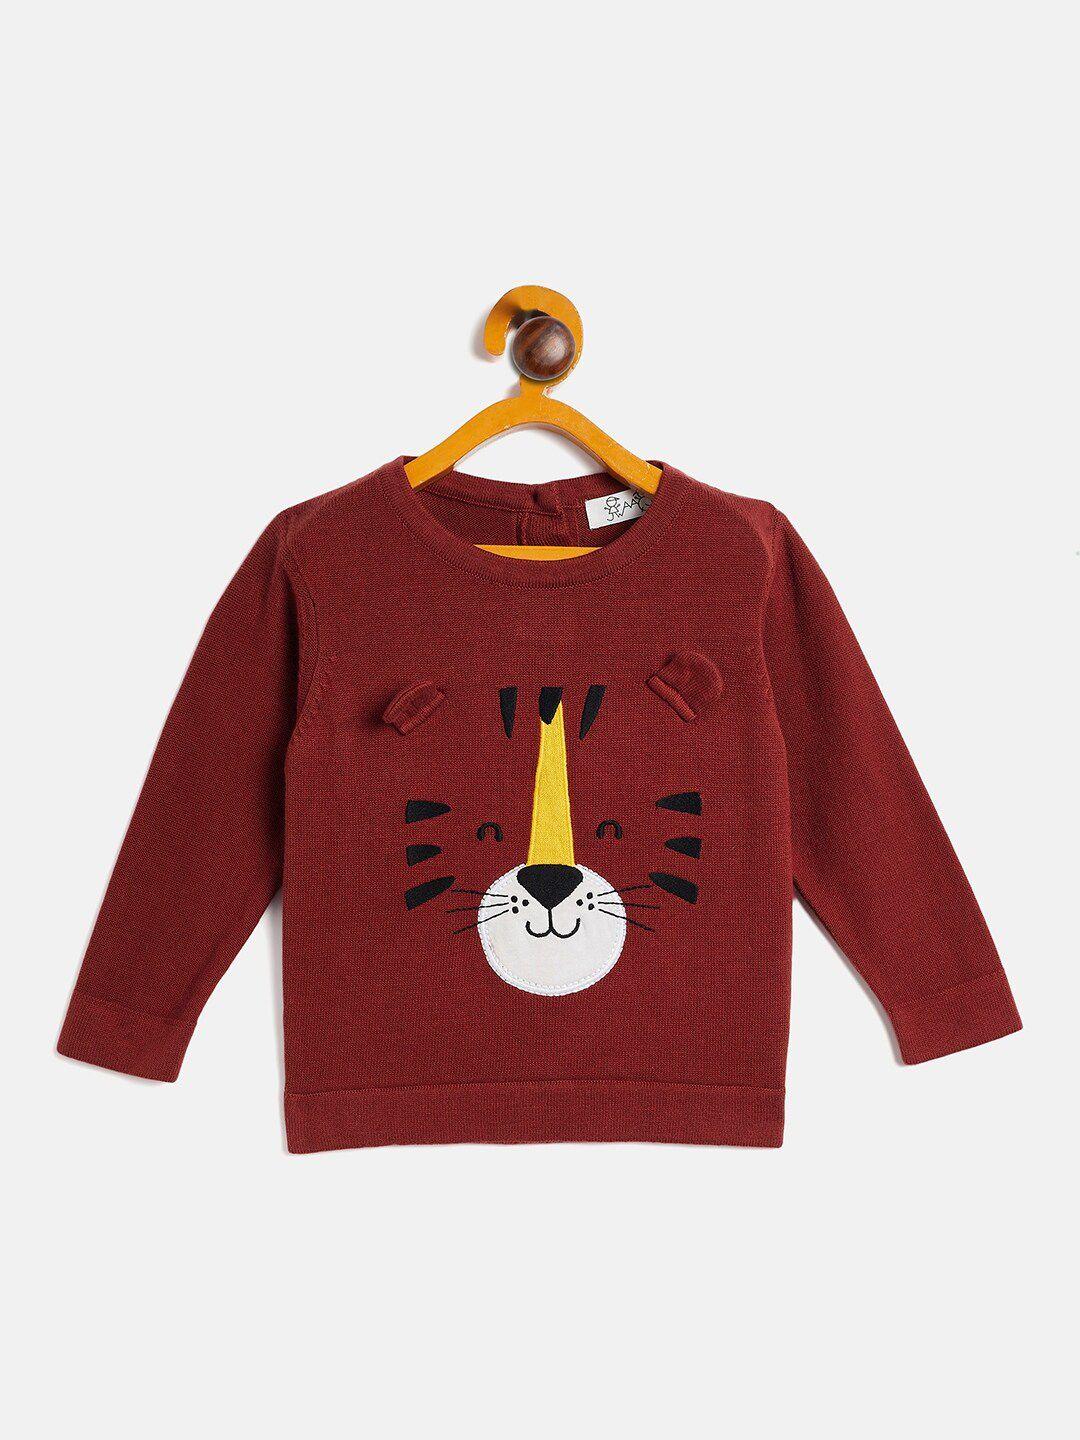 jwaaq unisex kids quirky printed embroiderd pure cotton pullover sweater